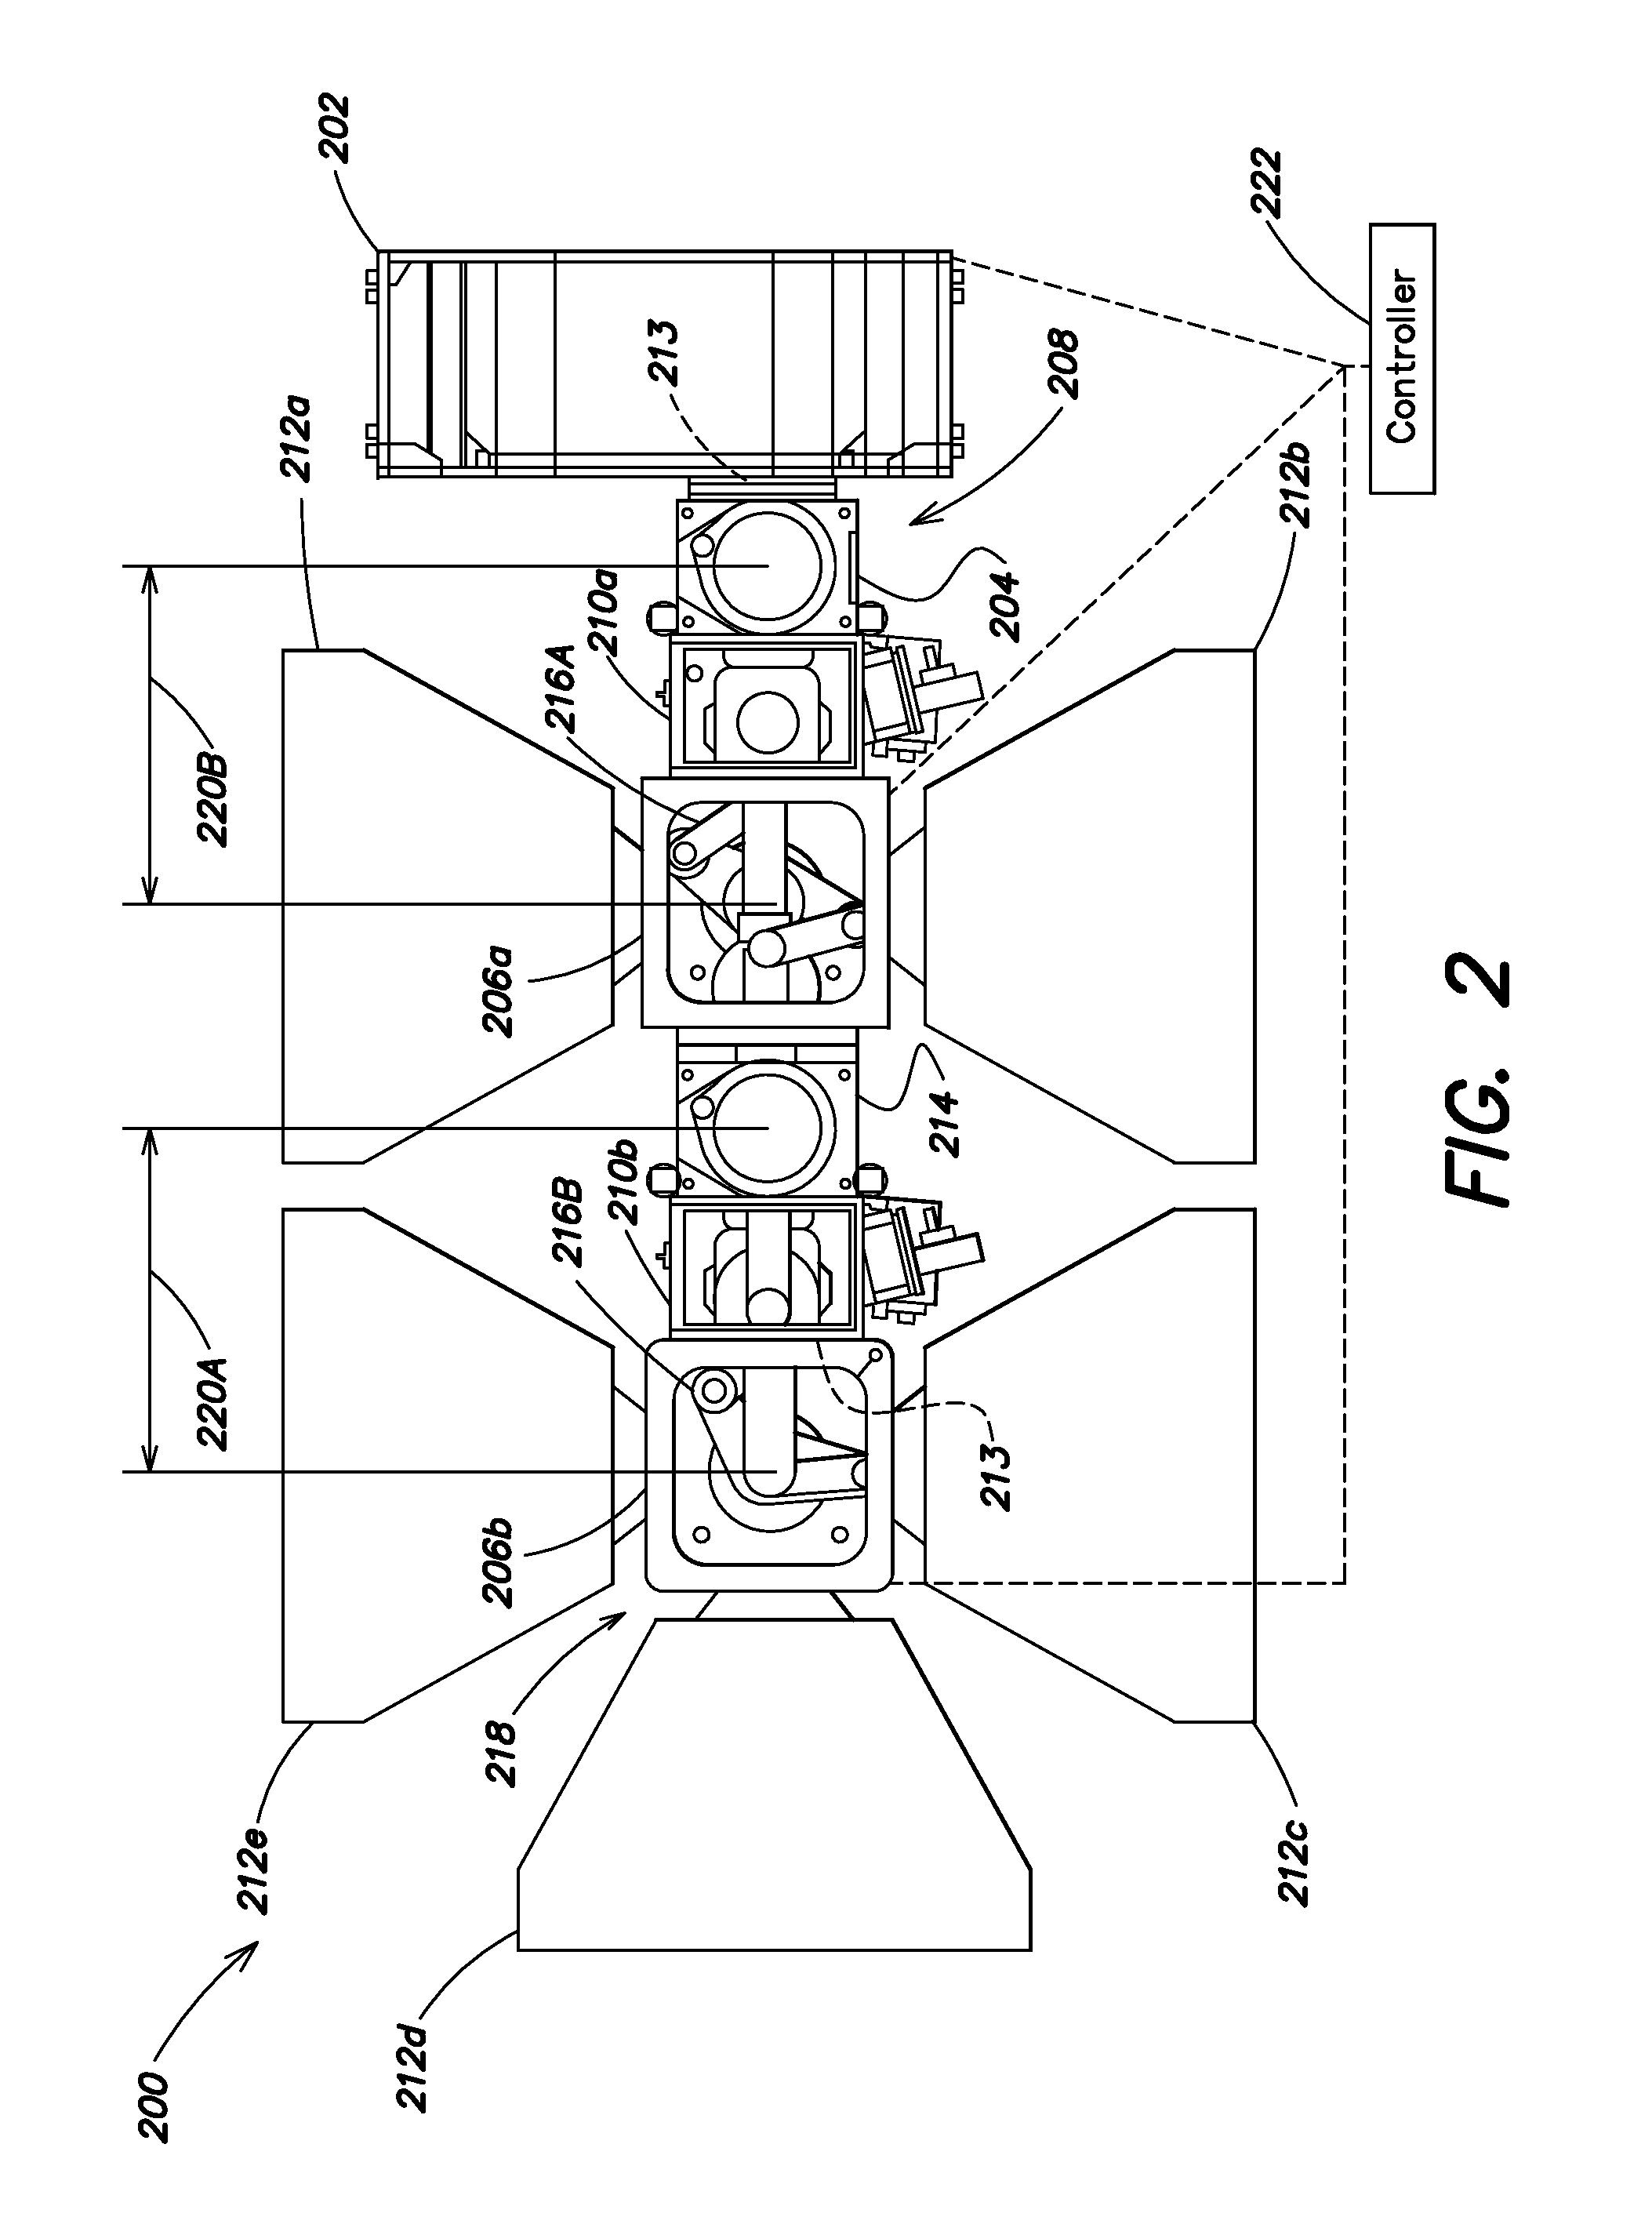 Methods and apparatus for extending the reach of a dual scara robot linkage